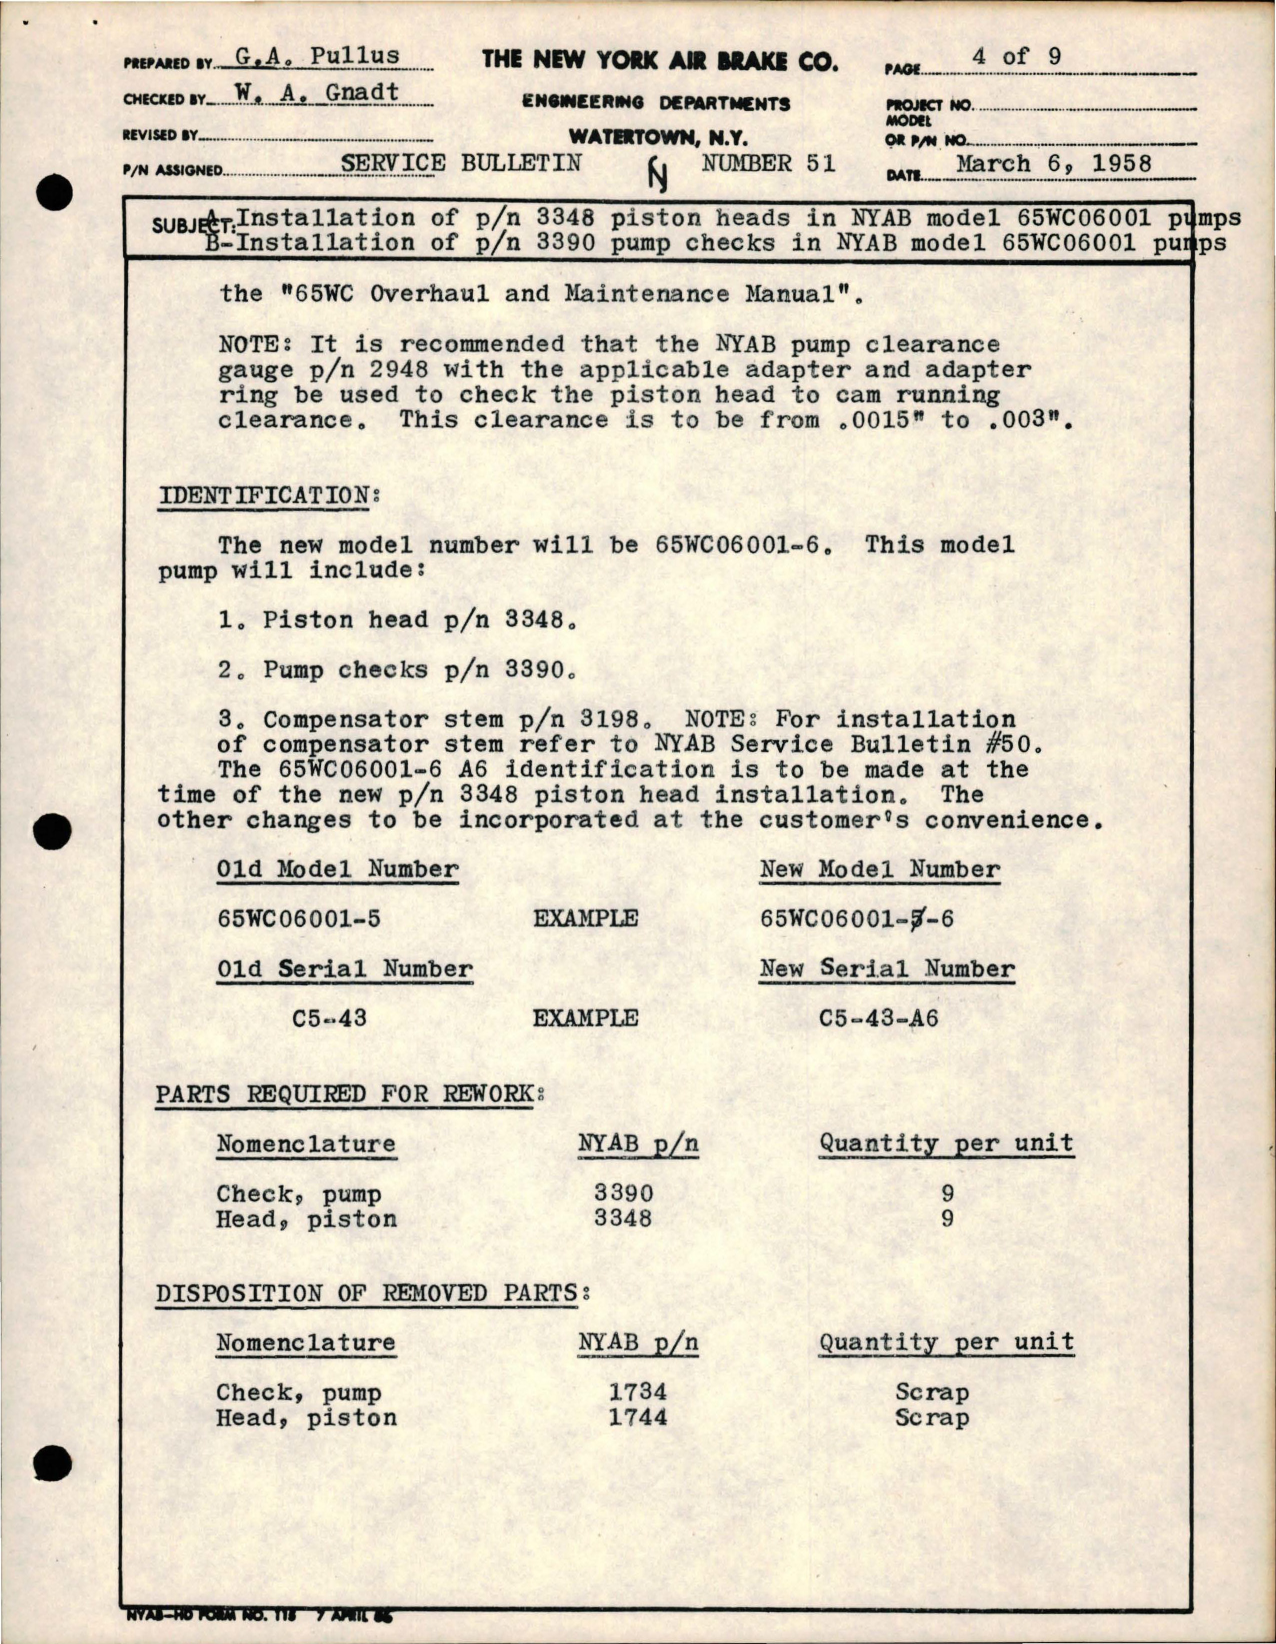 Sample page 5 from AirCorps Library document: Installation Piston Heads Part 3348 in Model 65WC06001, and Installation of Pump Check Part 3390 in Model 65WC06001 Pumps